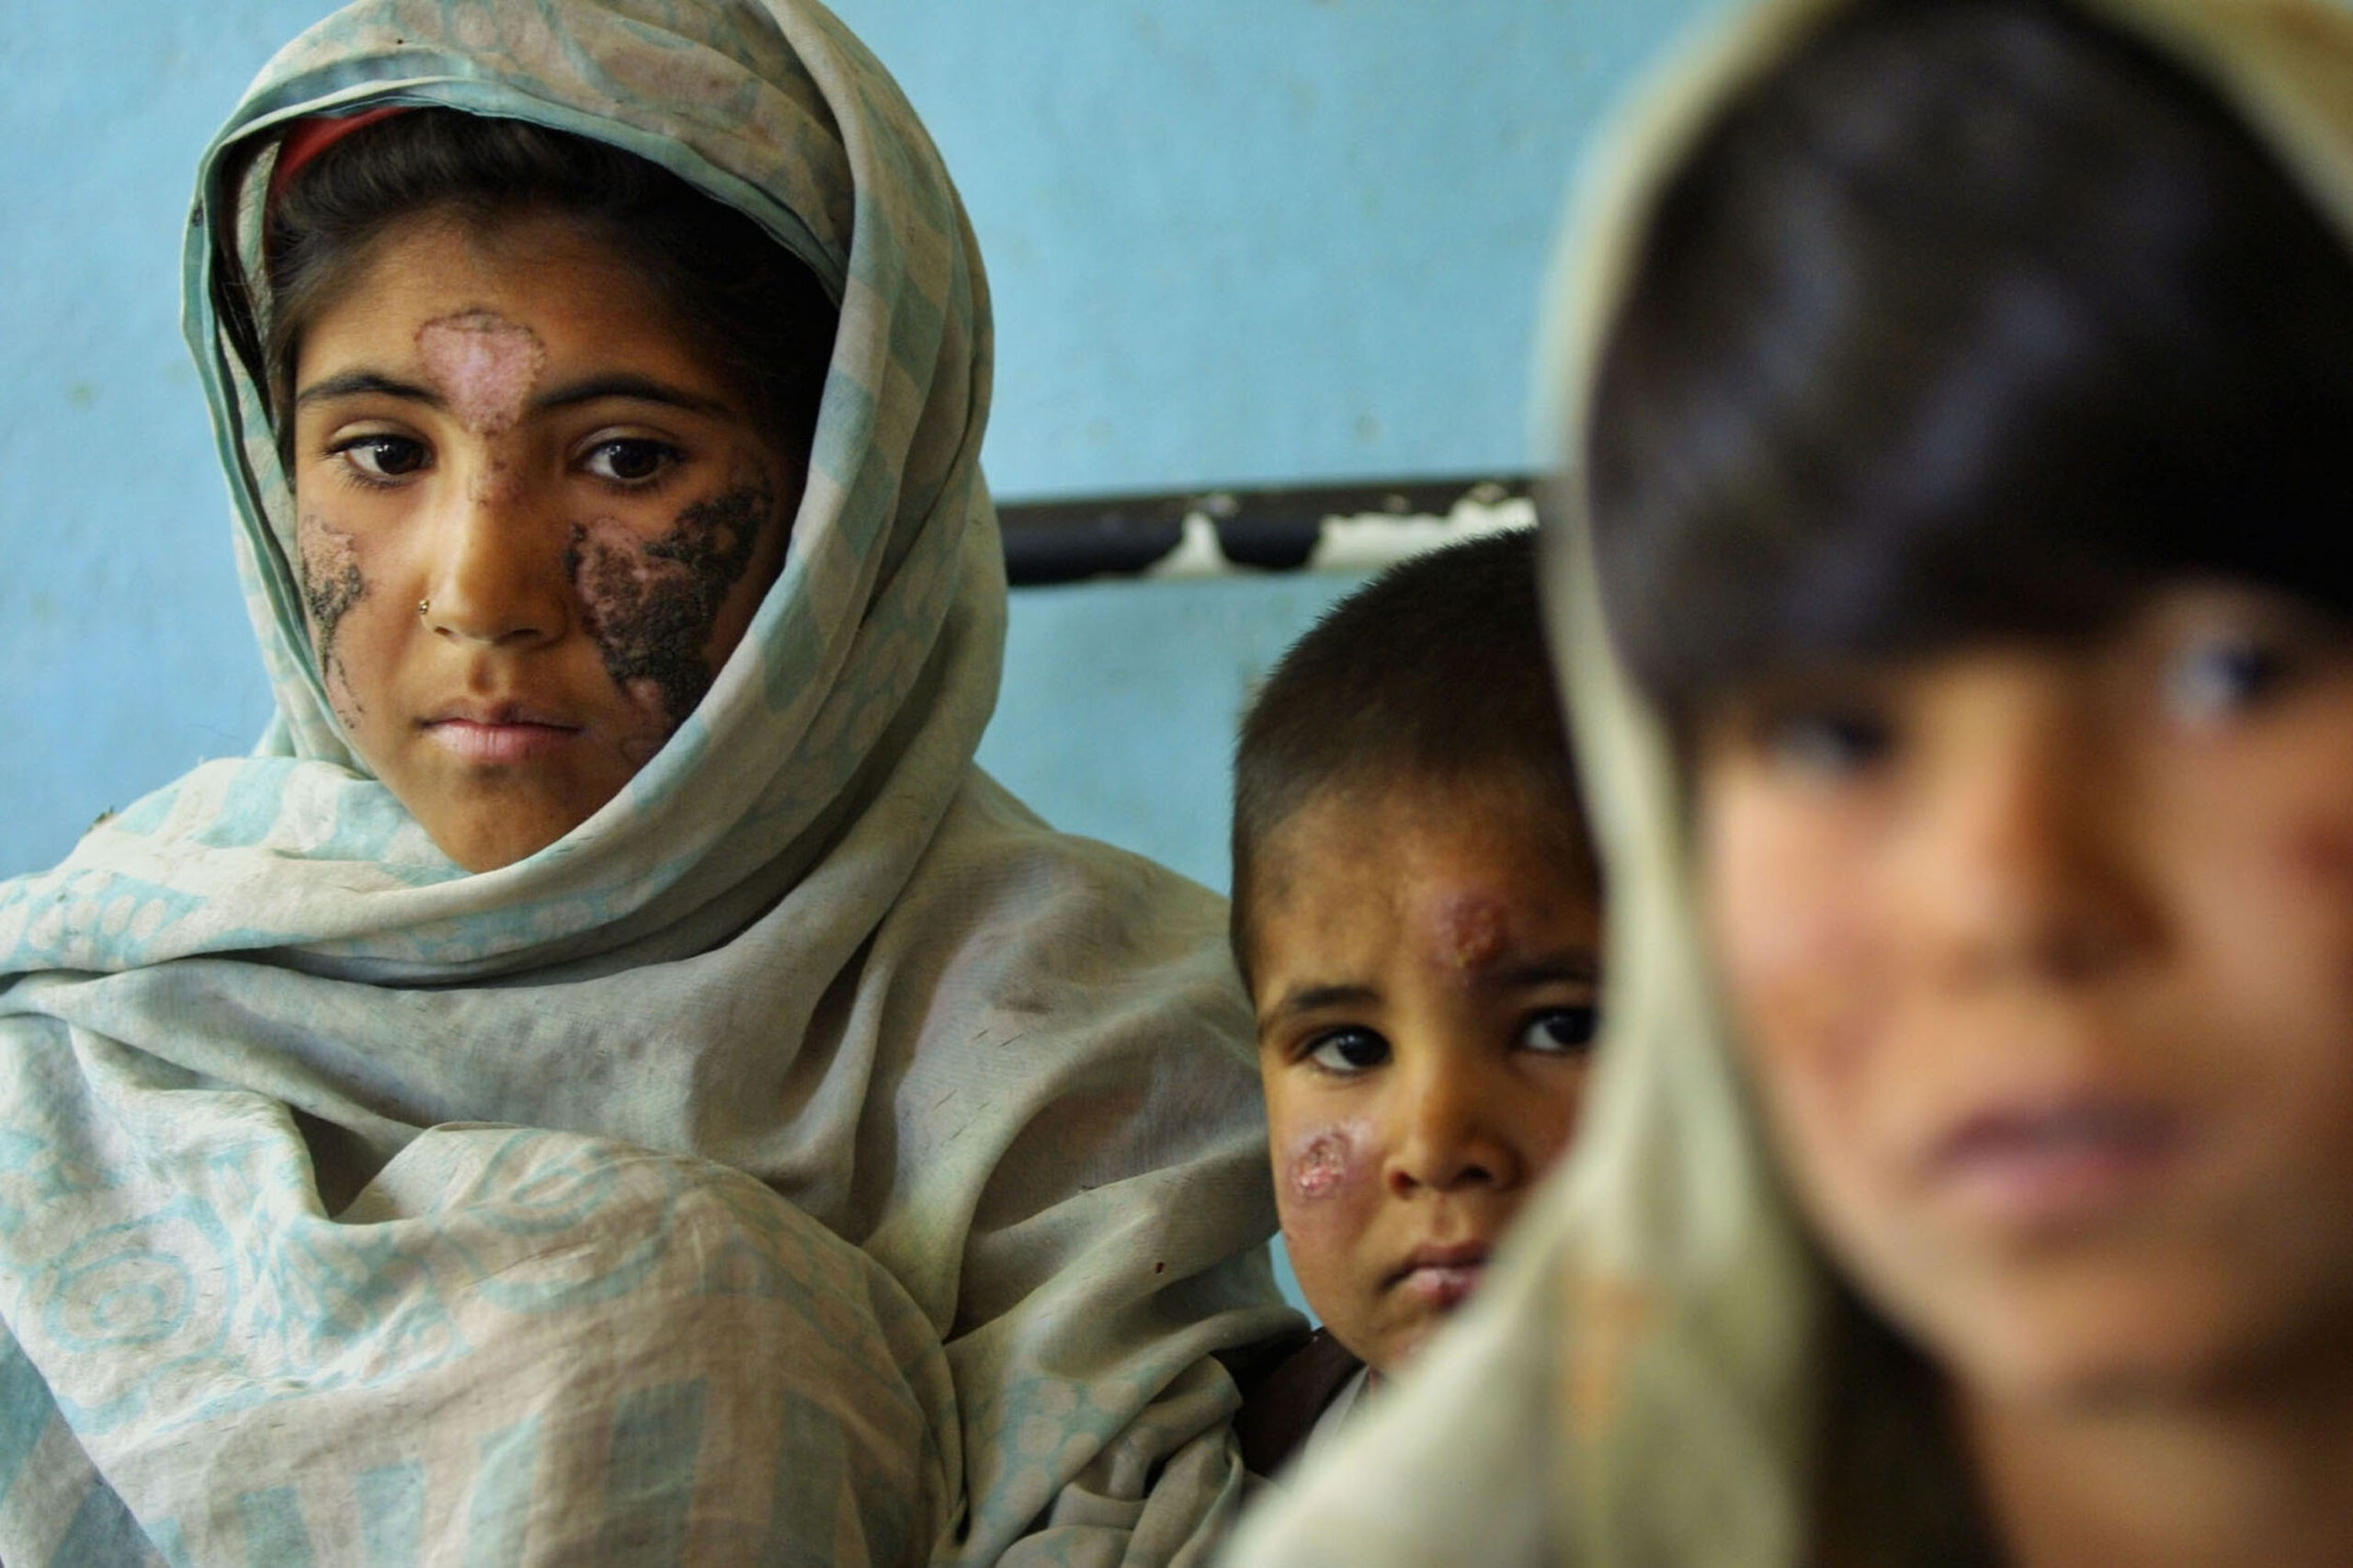 Children Suffering From Cutaneous Leishmaniasis A Disfiguring And Disabling Skin Disease